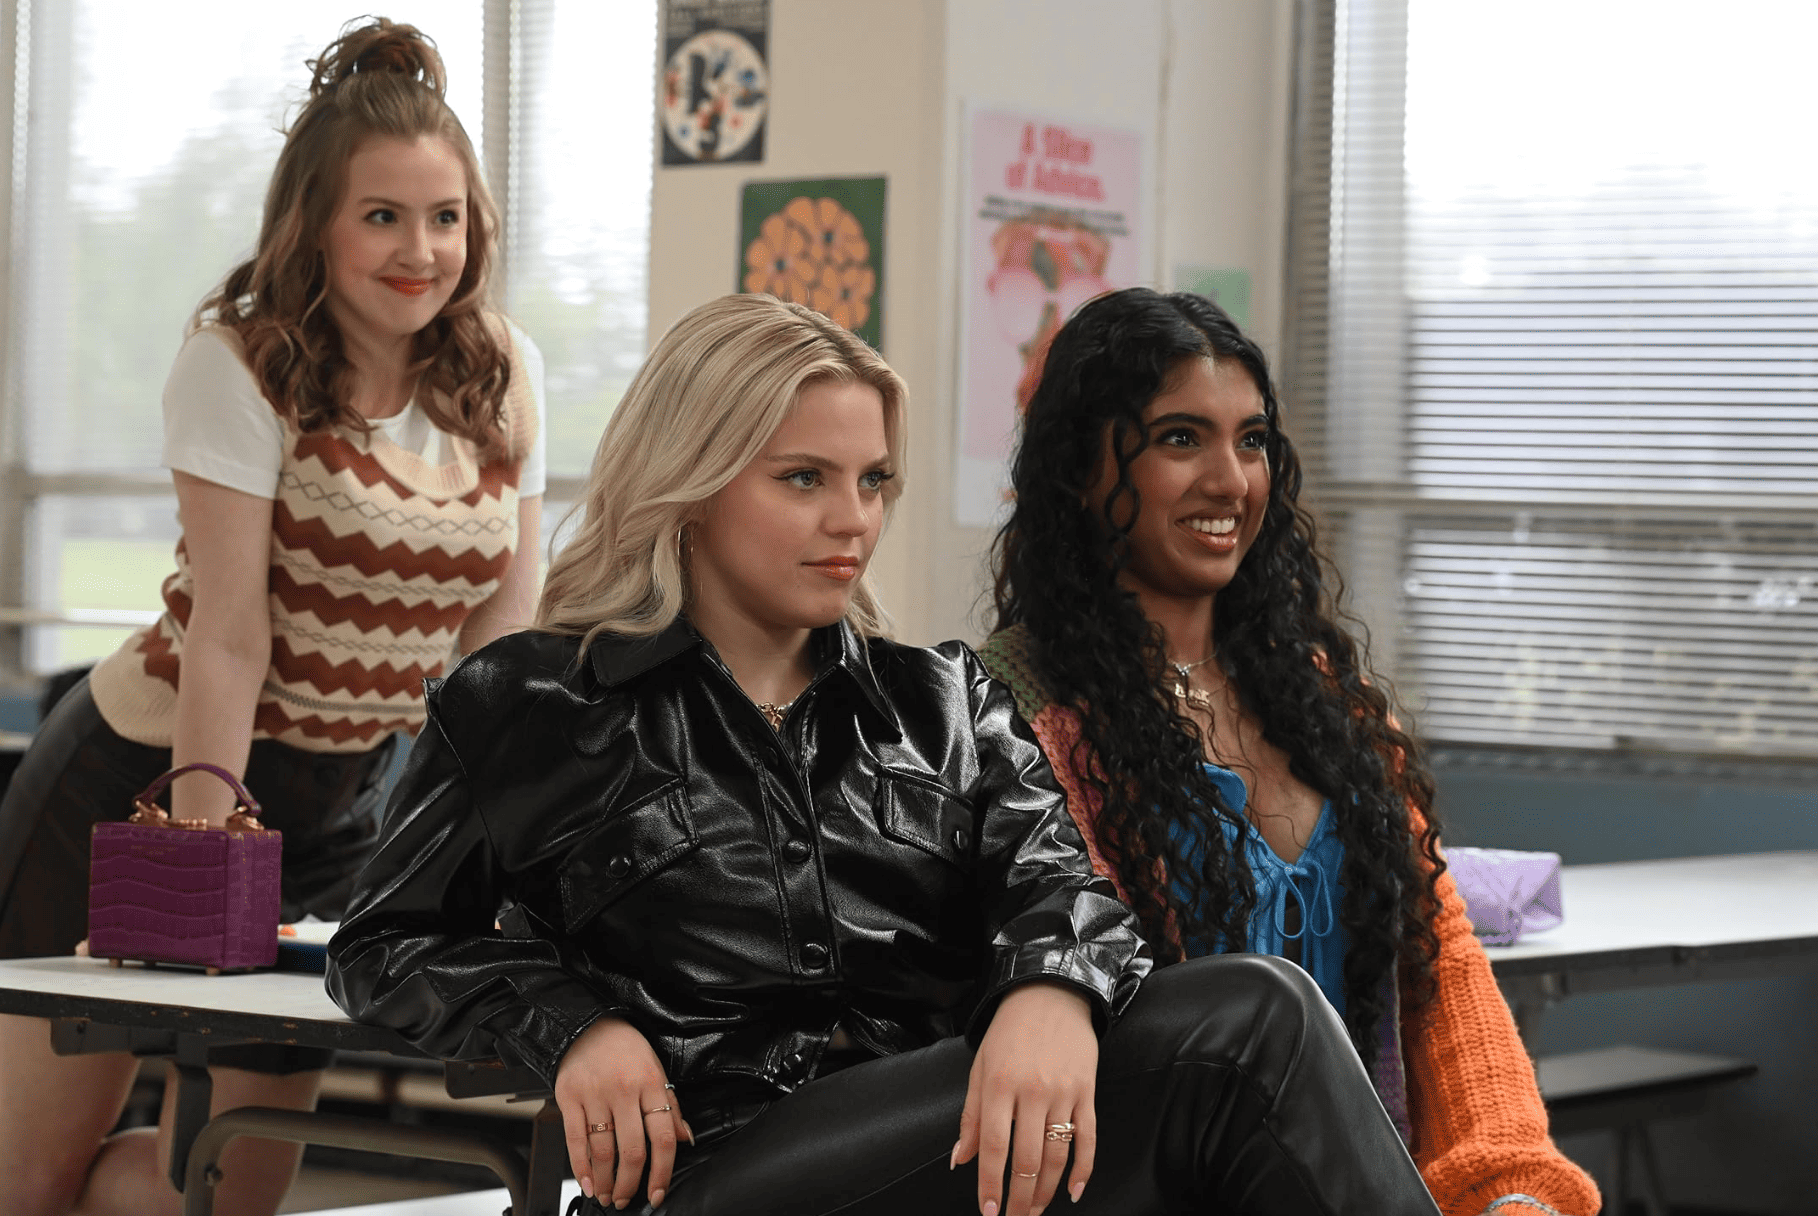 Three young women smile at someone in a classroom in this image from Paramount Pictures.